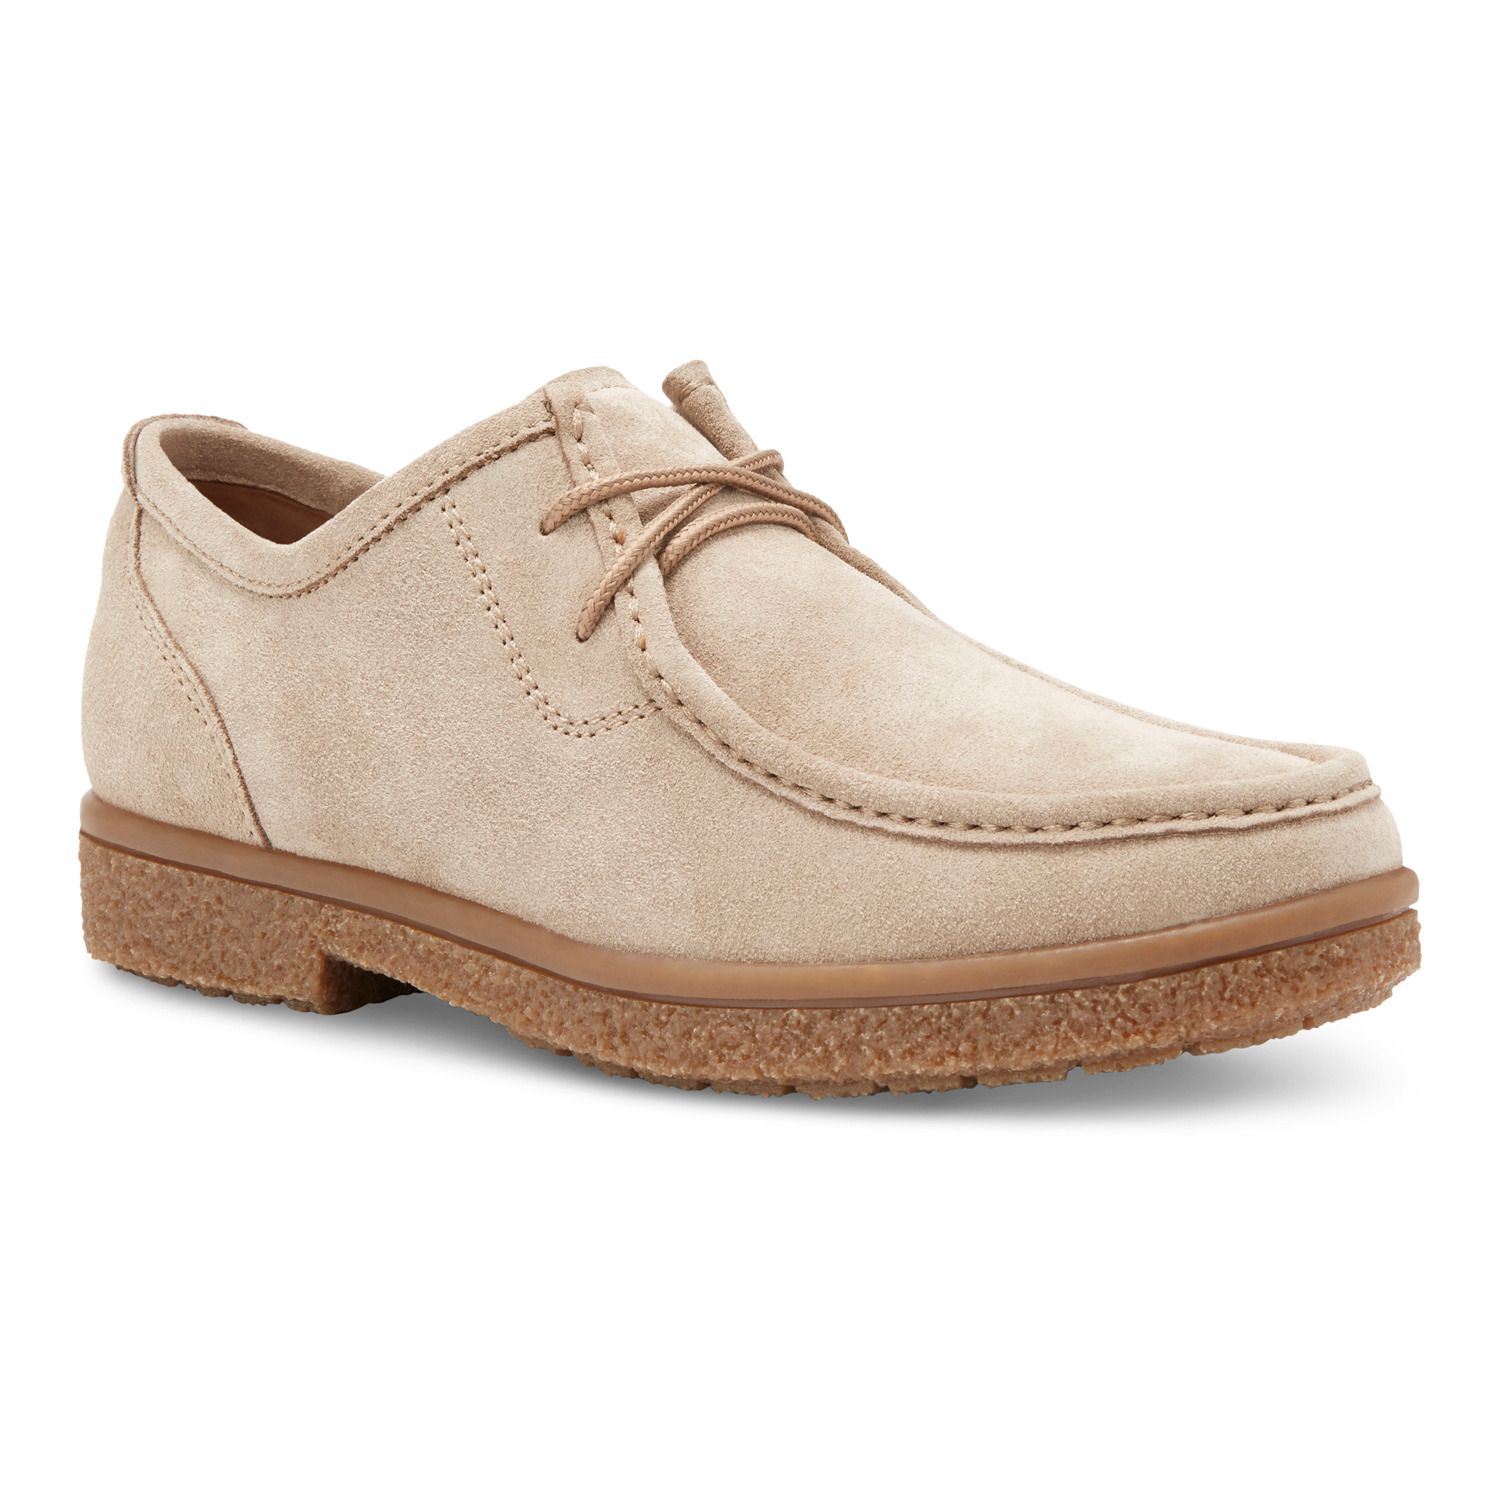 clarks men's wallabee step loafers shoes